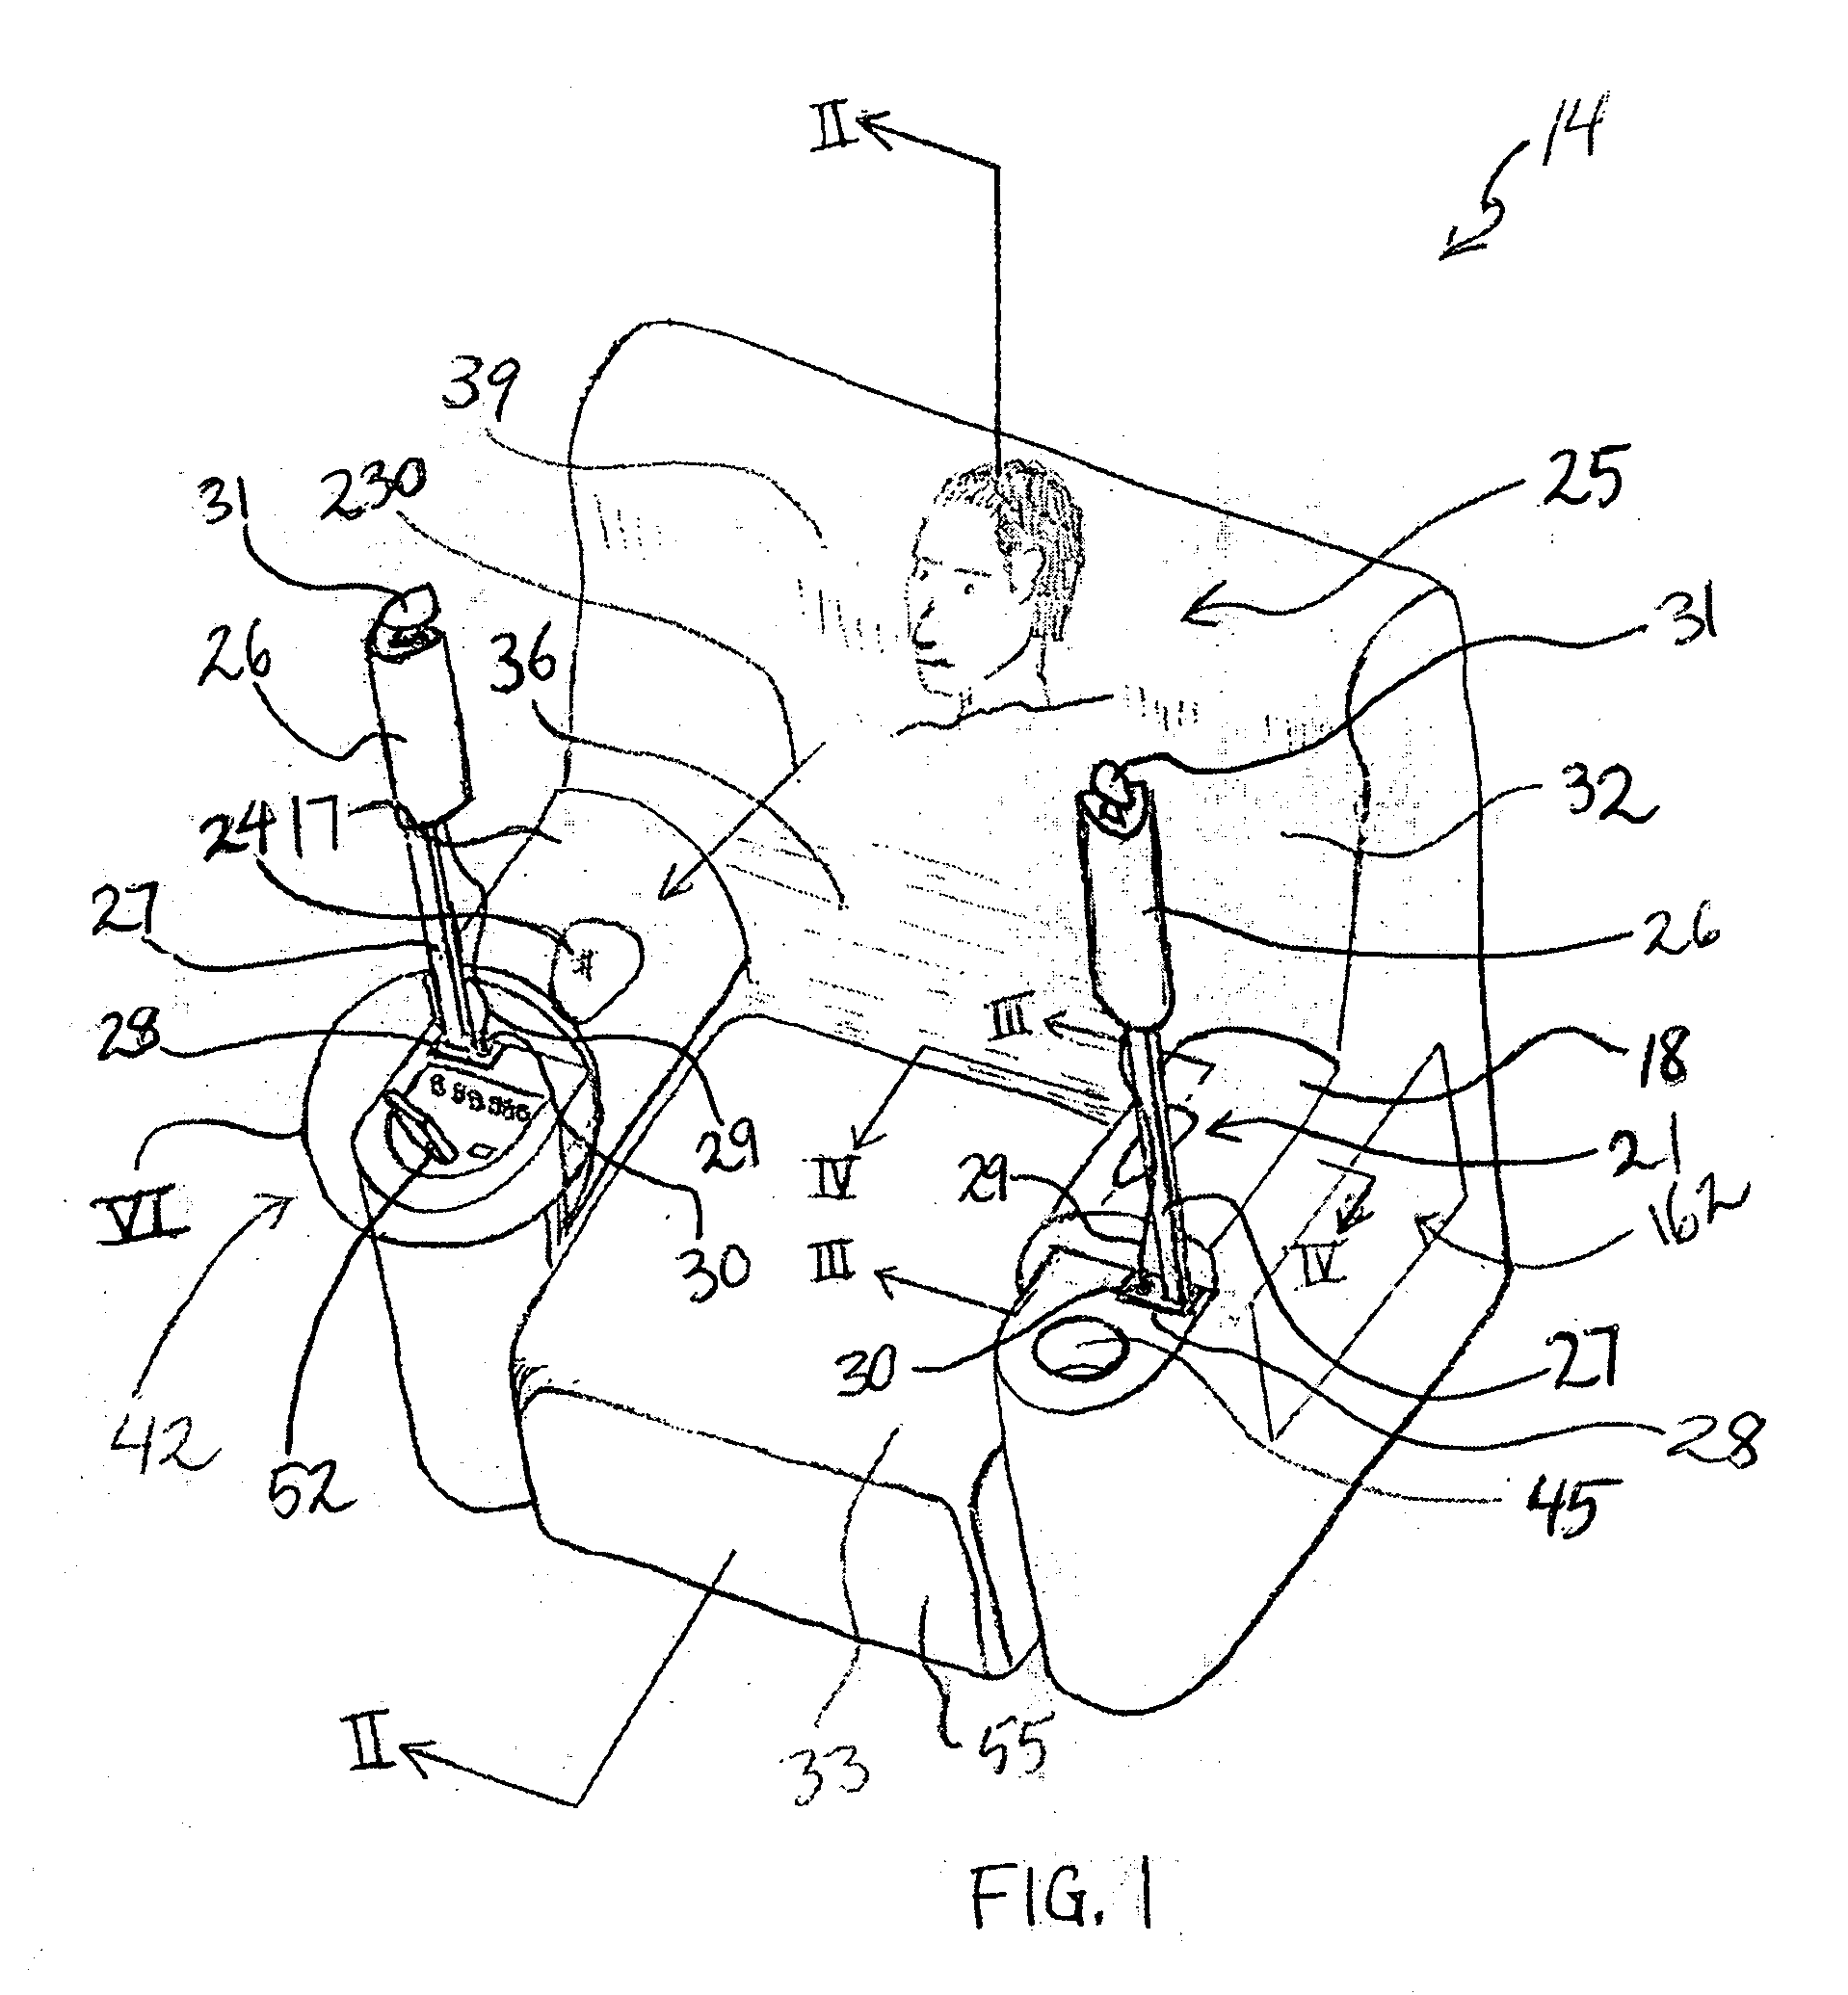 Apparatus, system, and method for an entertainment chair